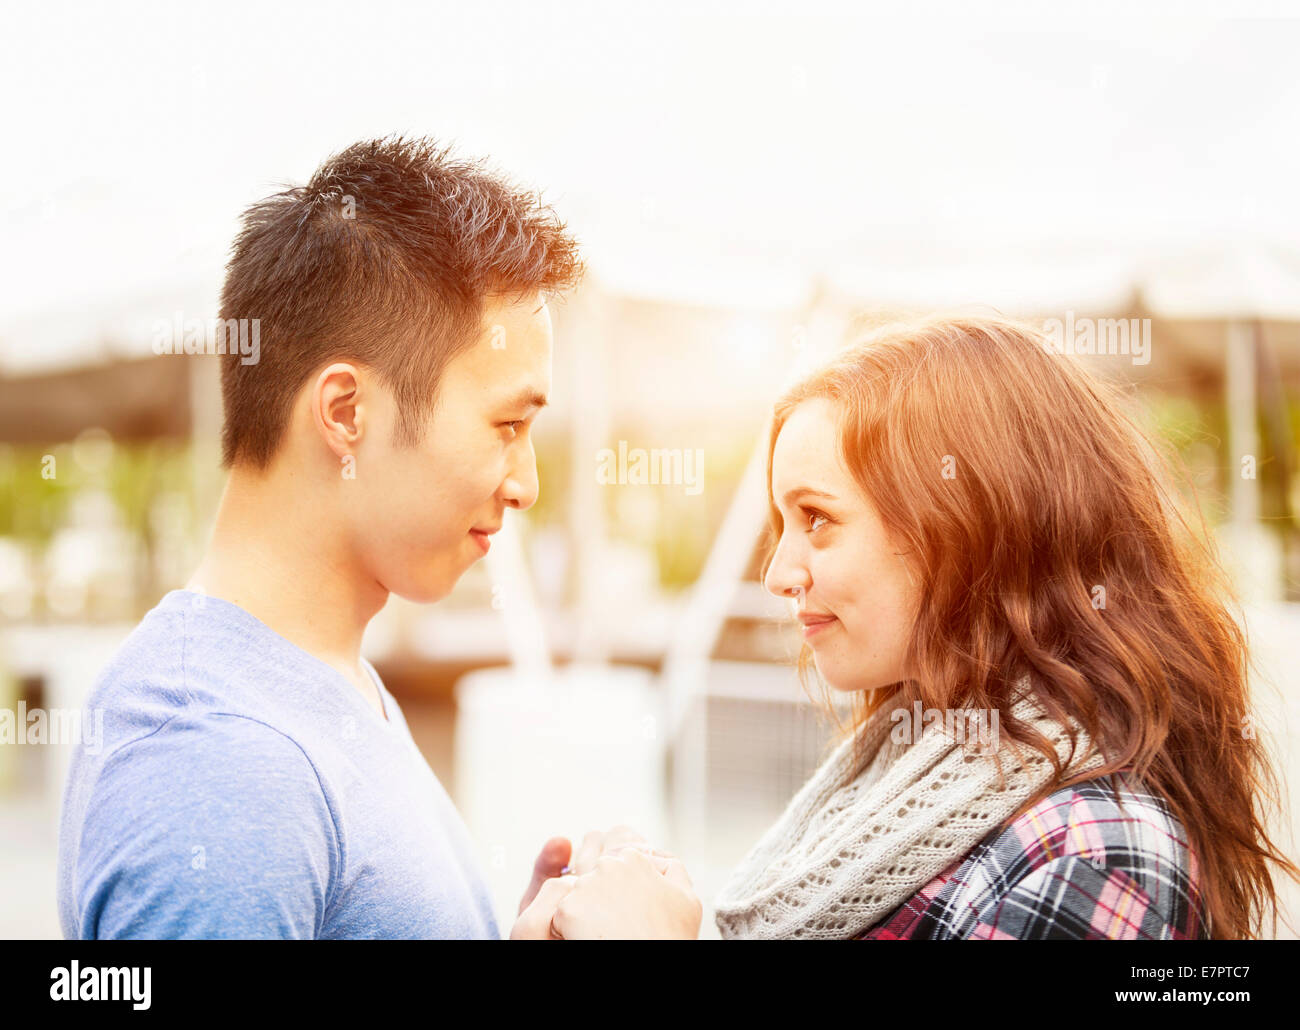 Romantic interracial young couple holding hands and looking at each other outside in sunset light Stock Photo